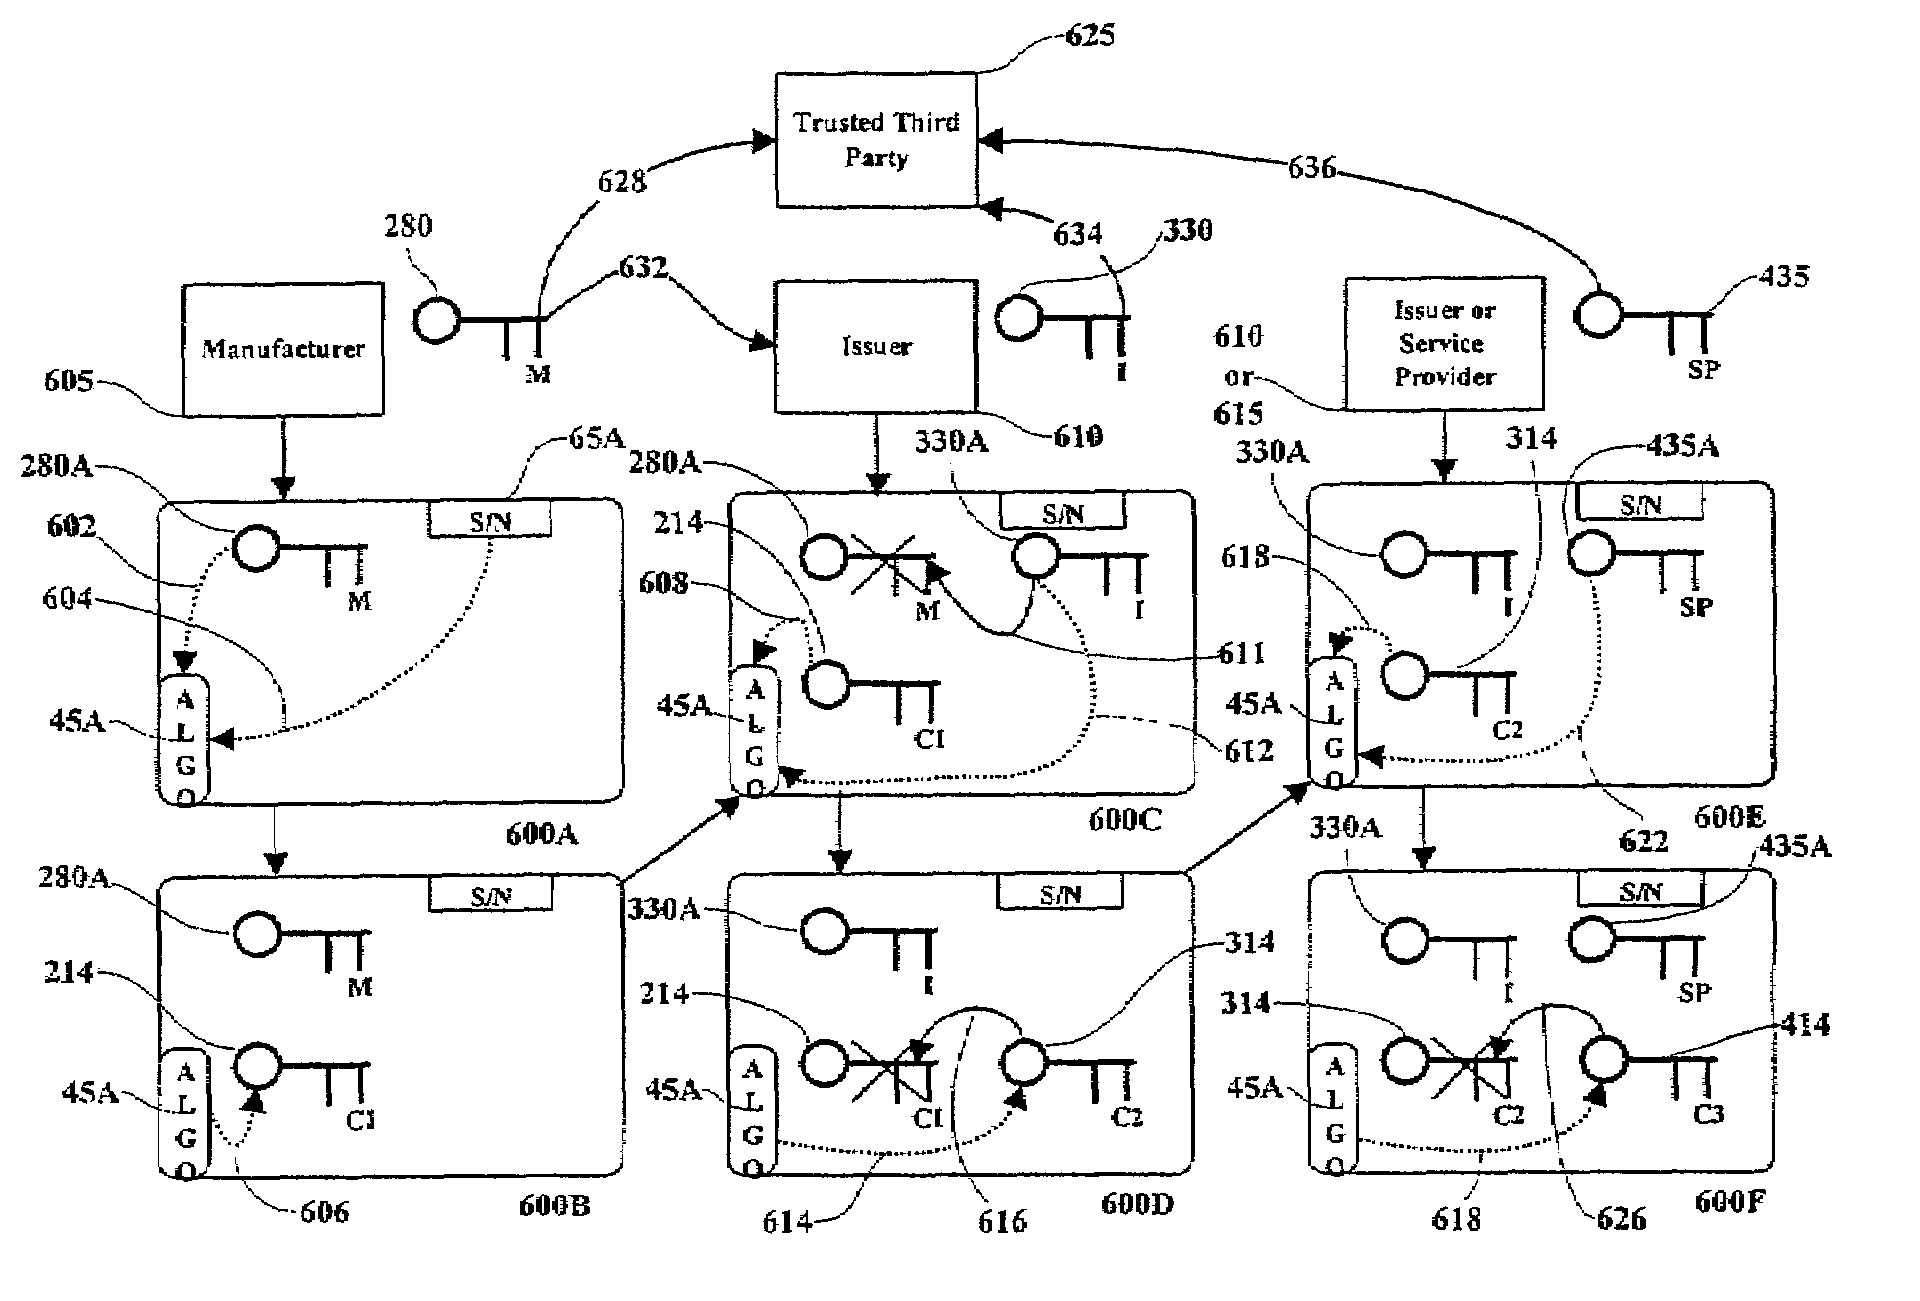 System and method for generating symmetric keys within a personal security device having minimal trust relationships